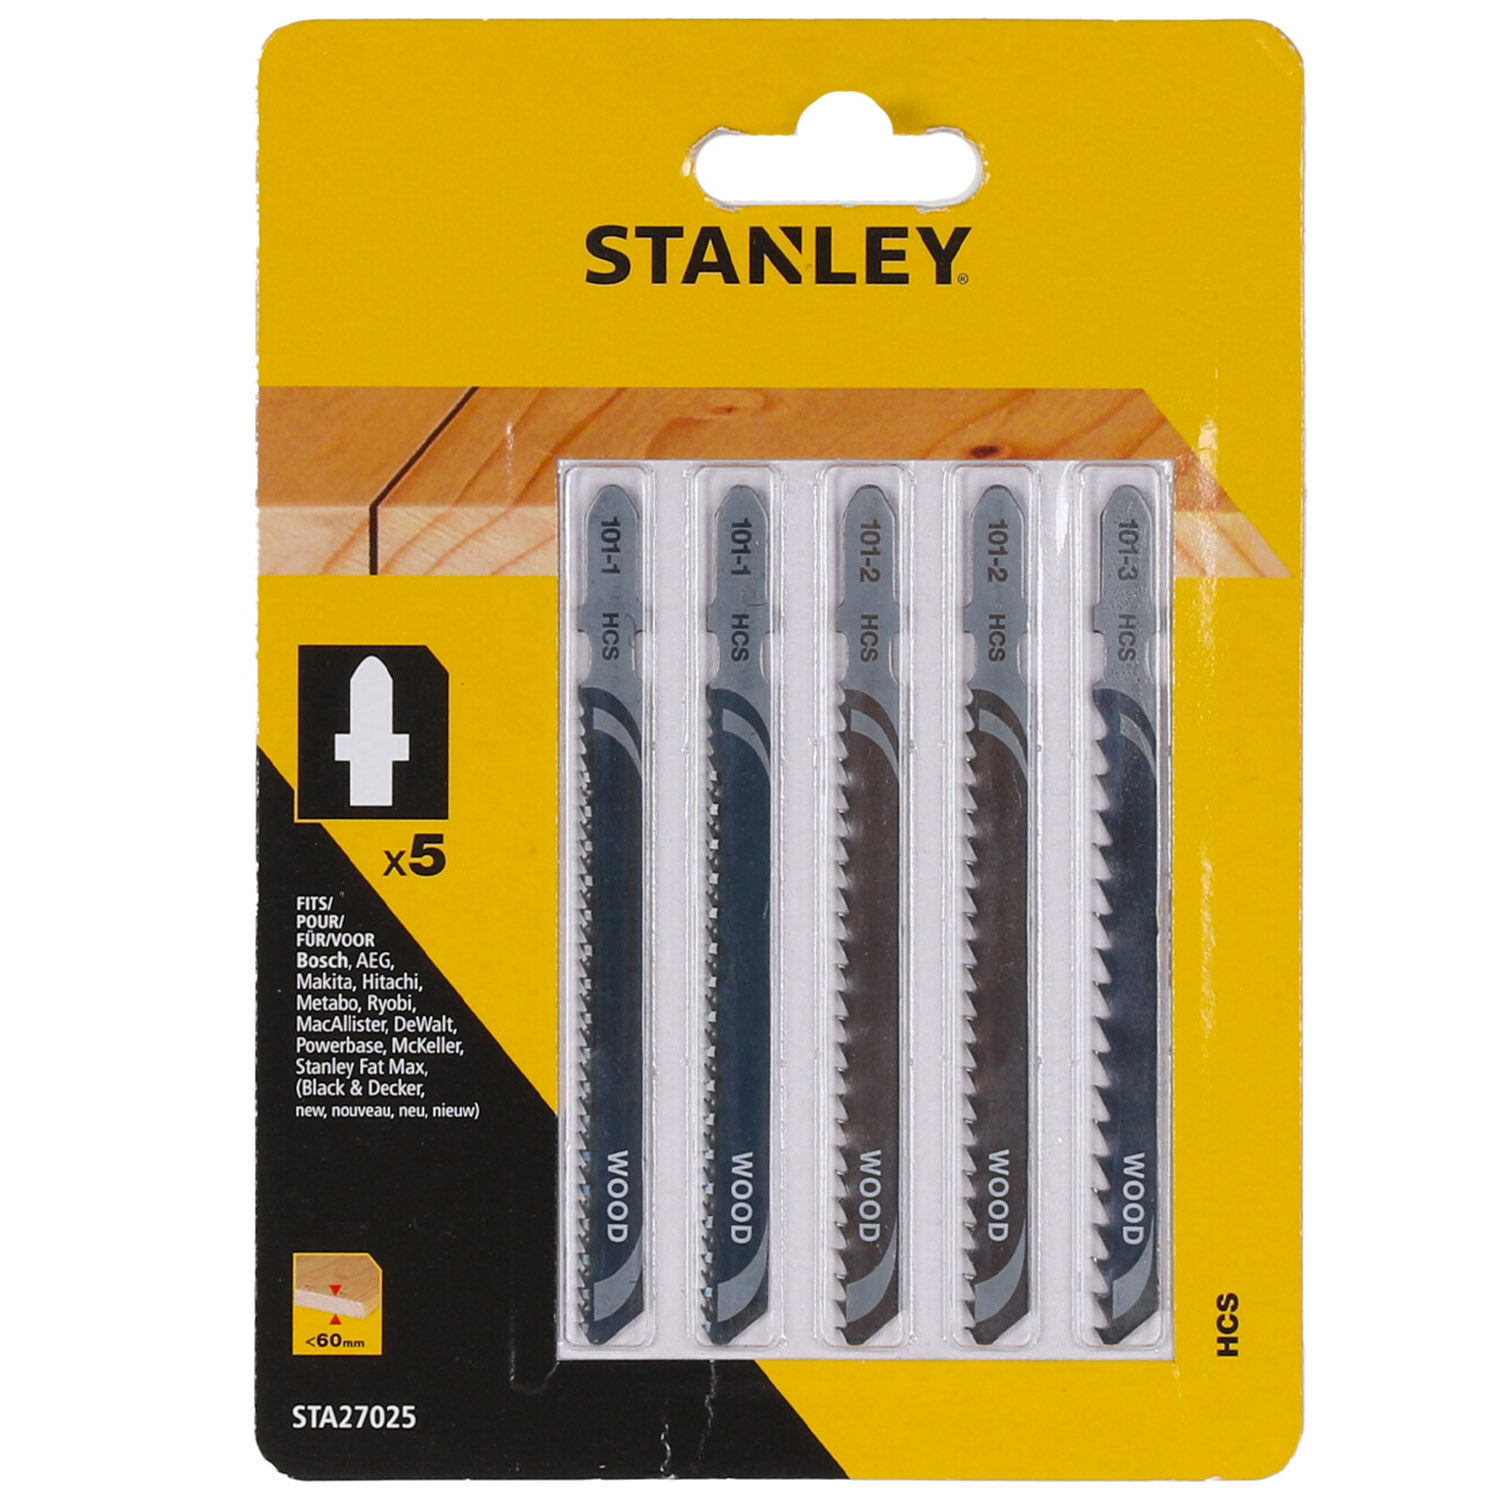 Stanley T Shank Jigsaw Blades 5 Pack Image